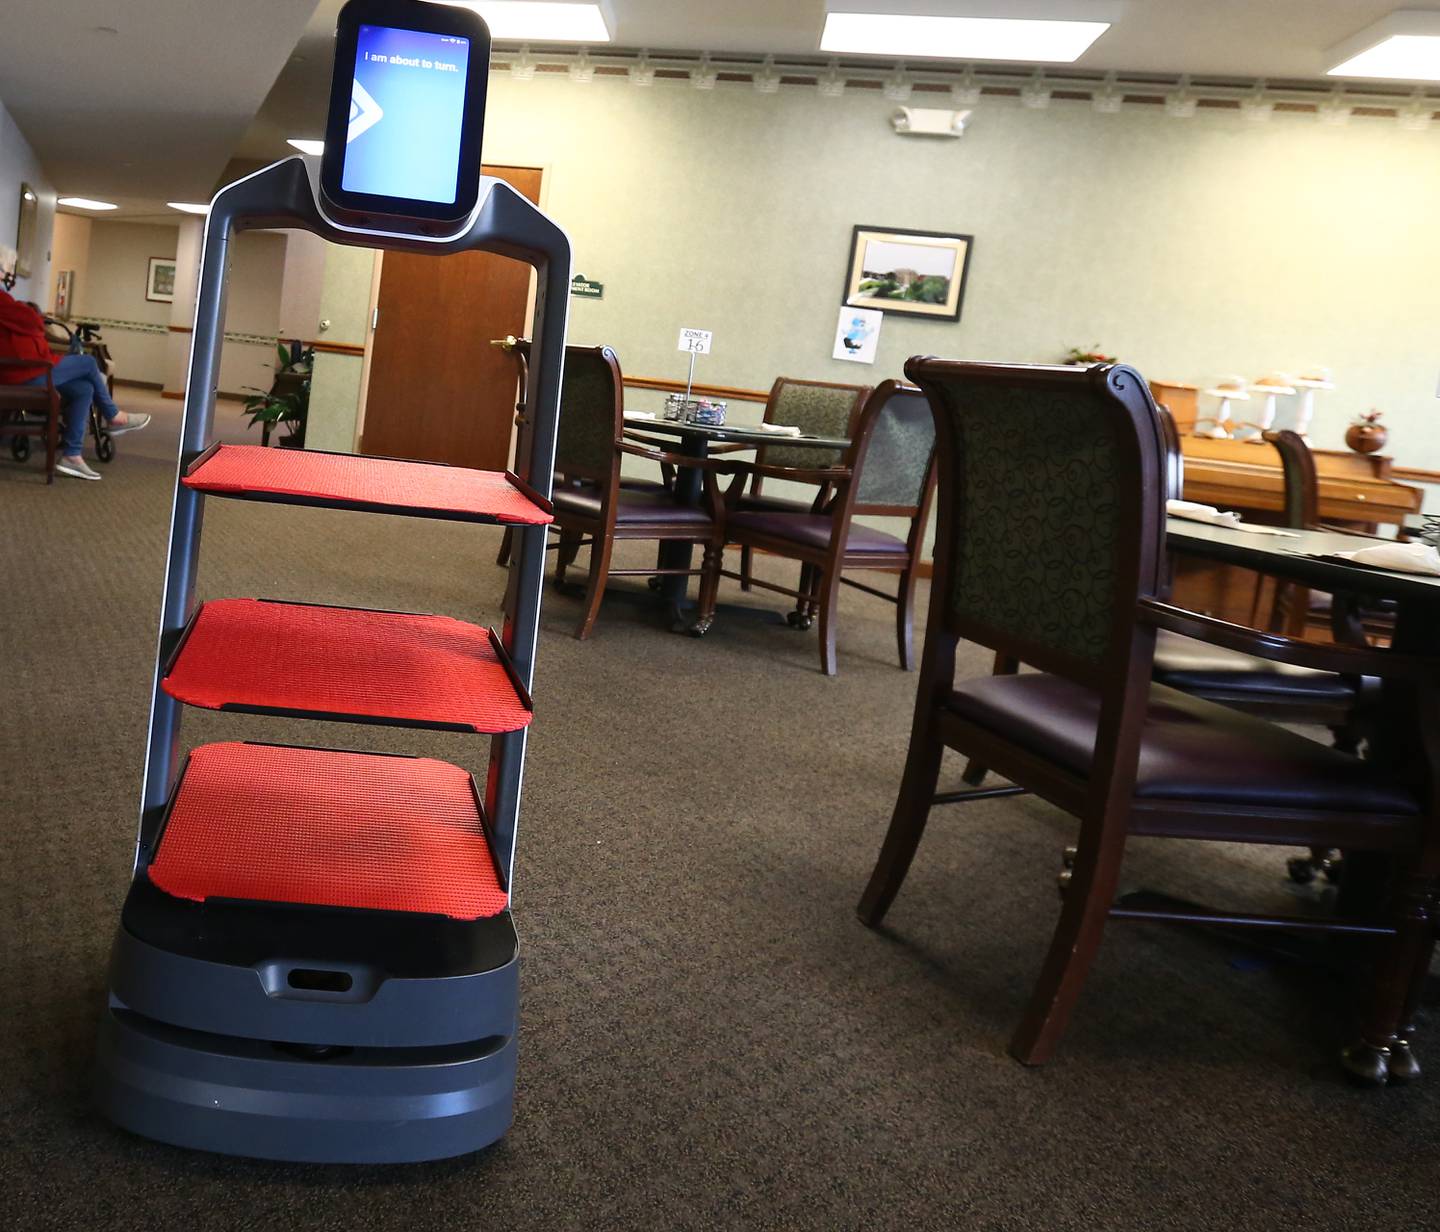 Rosie the new high-tech robot makes a left turn into the dining area at Heritage Woods on Tuesday Jan. 11, 2022 in Ottawa.